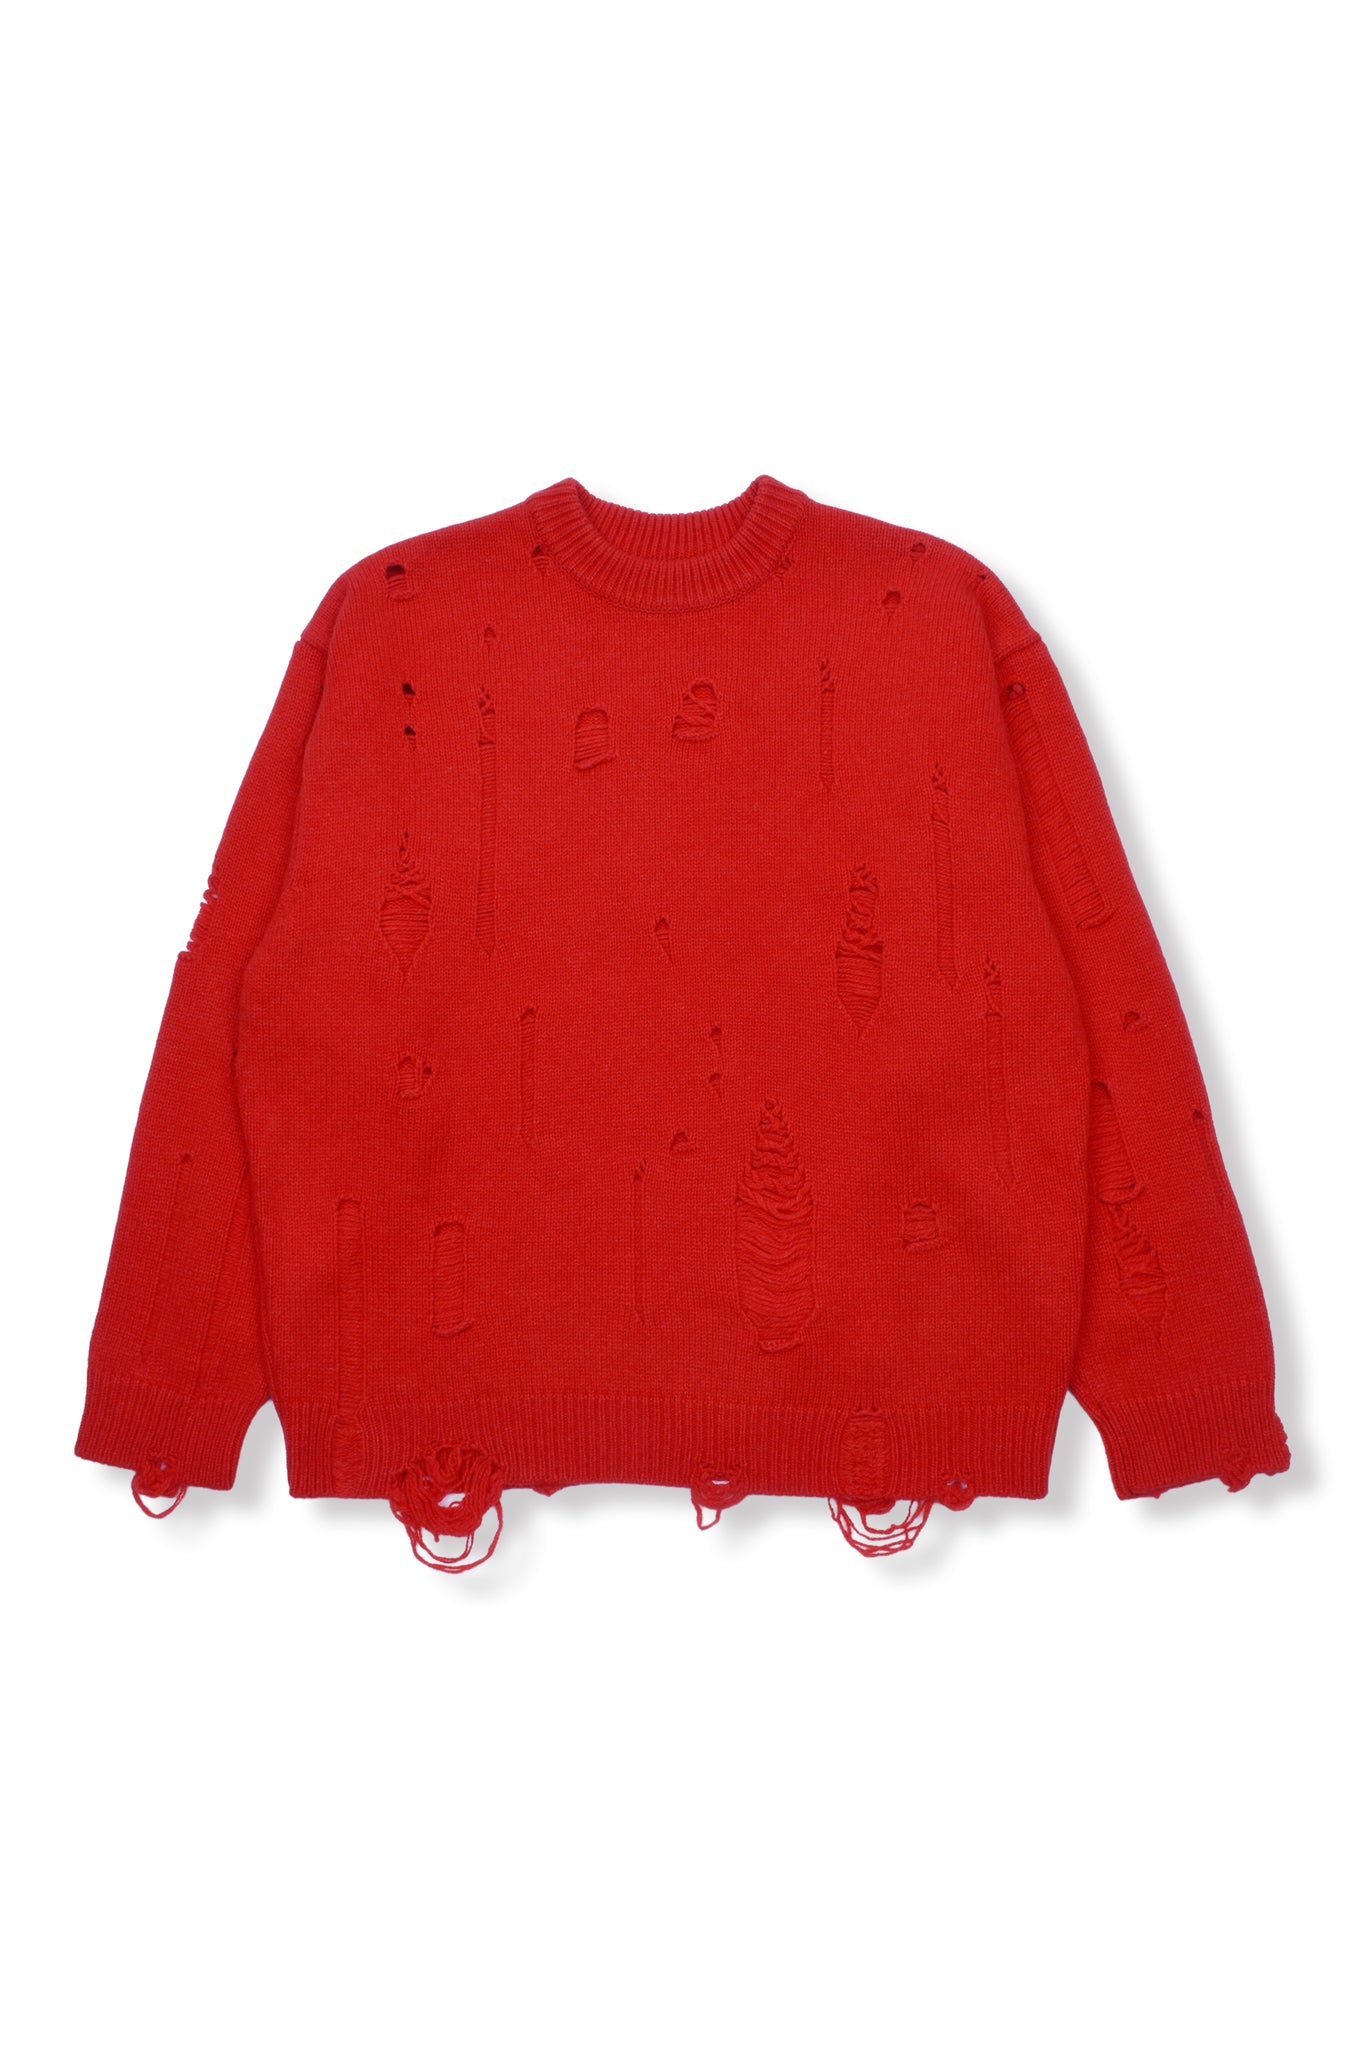 DAMAGED KNIT SWEATER / RED